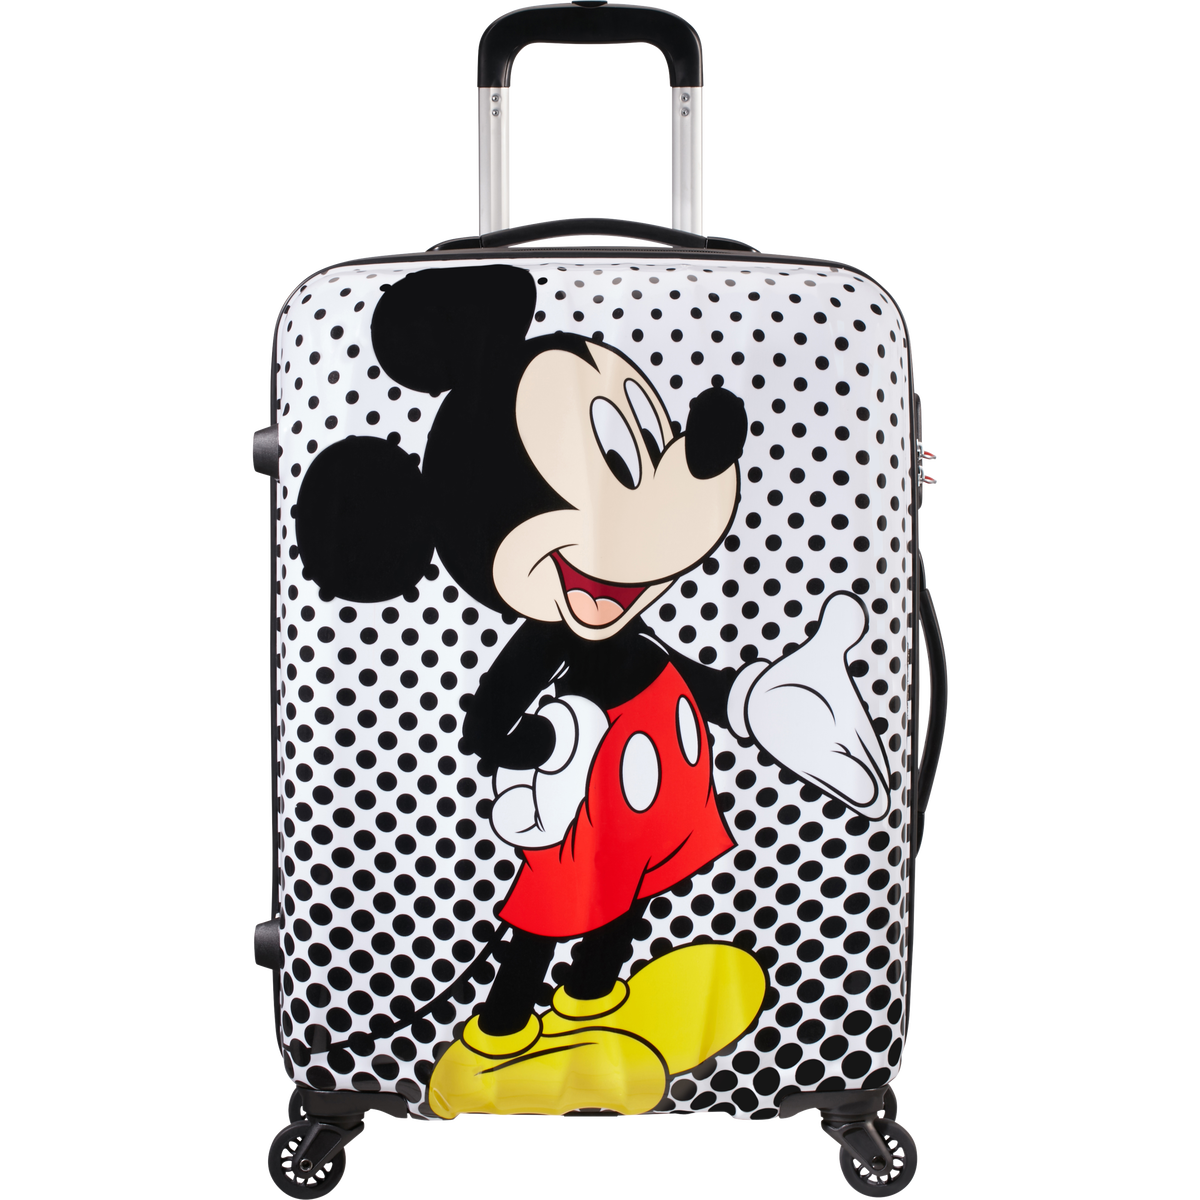 American Tourister Disney Legends Equipaje mediano Mickey Mouse Polka Dot